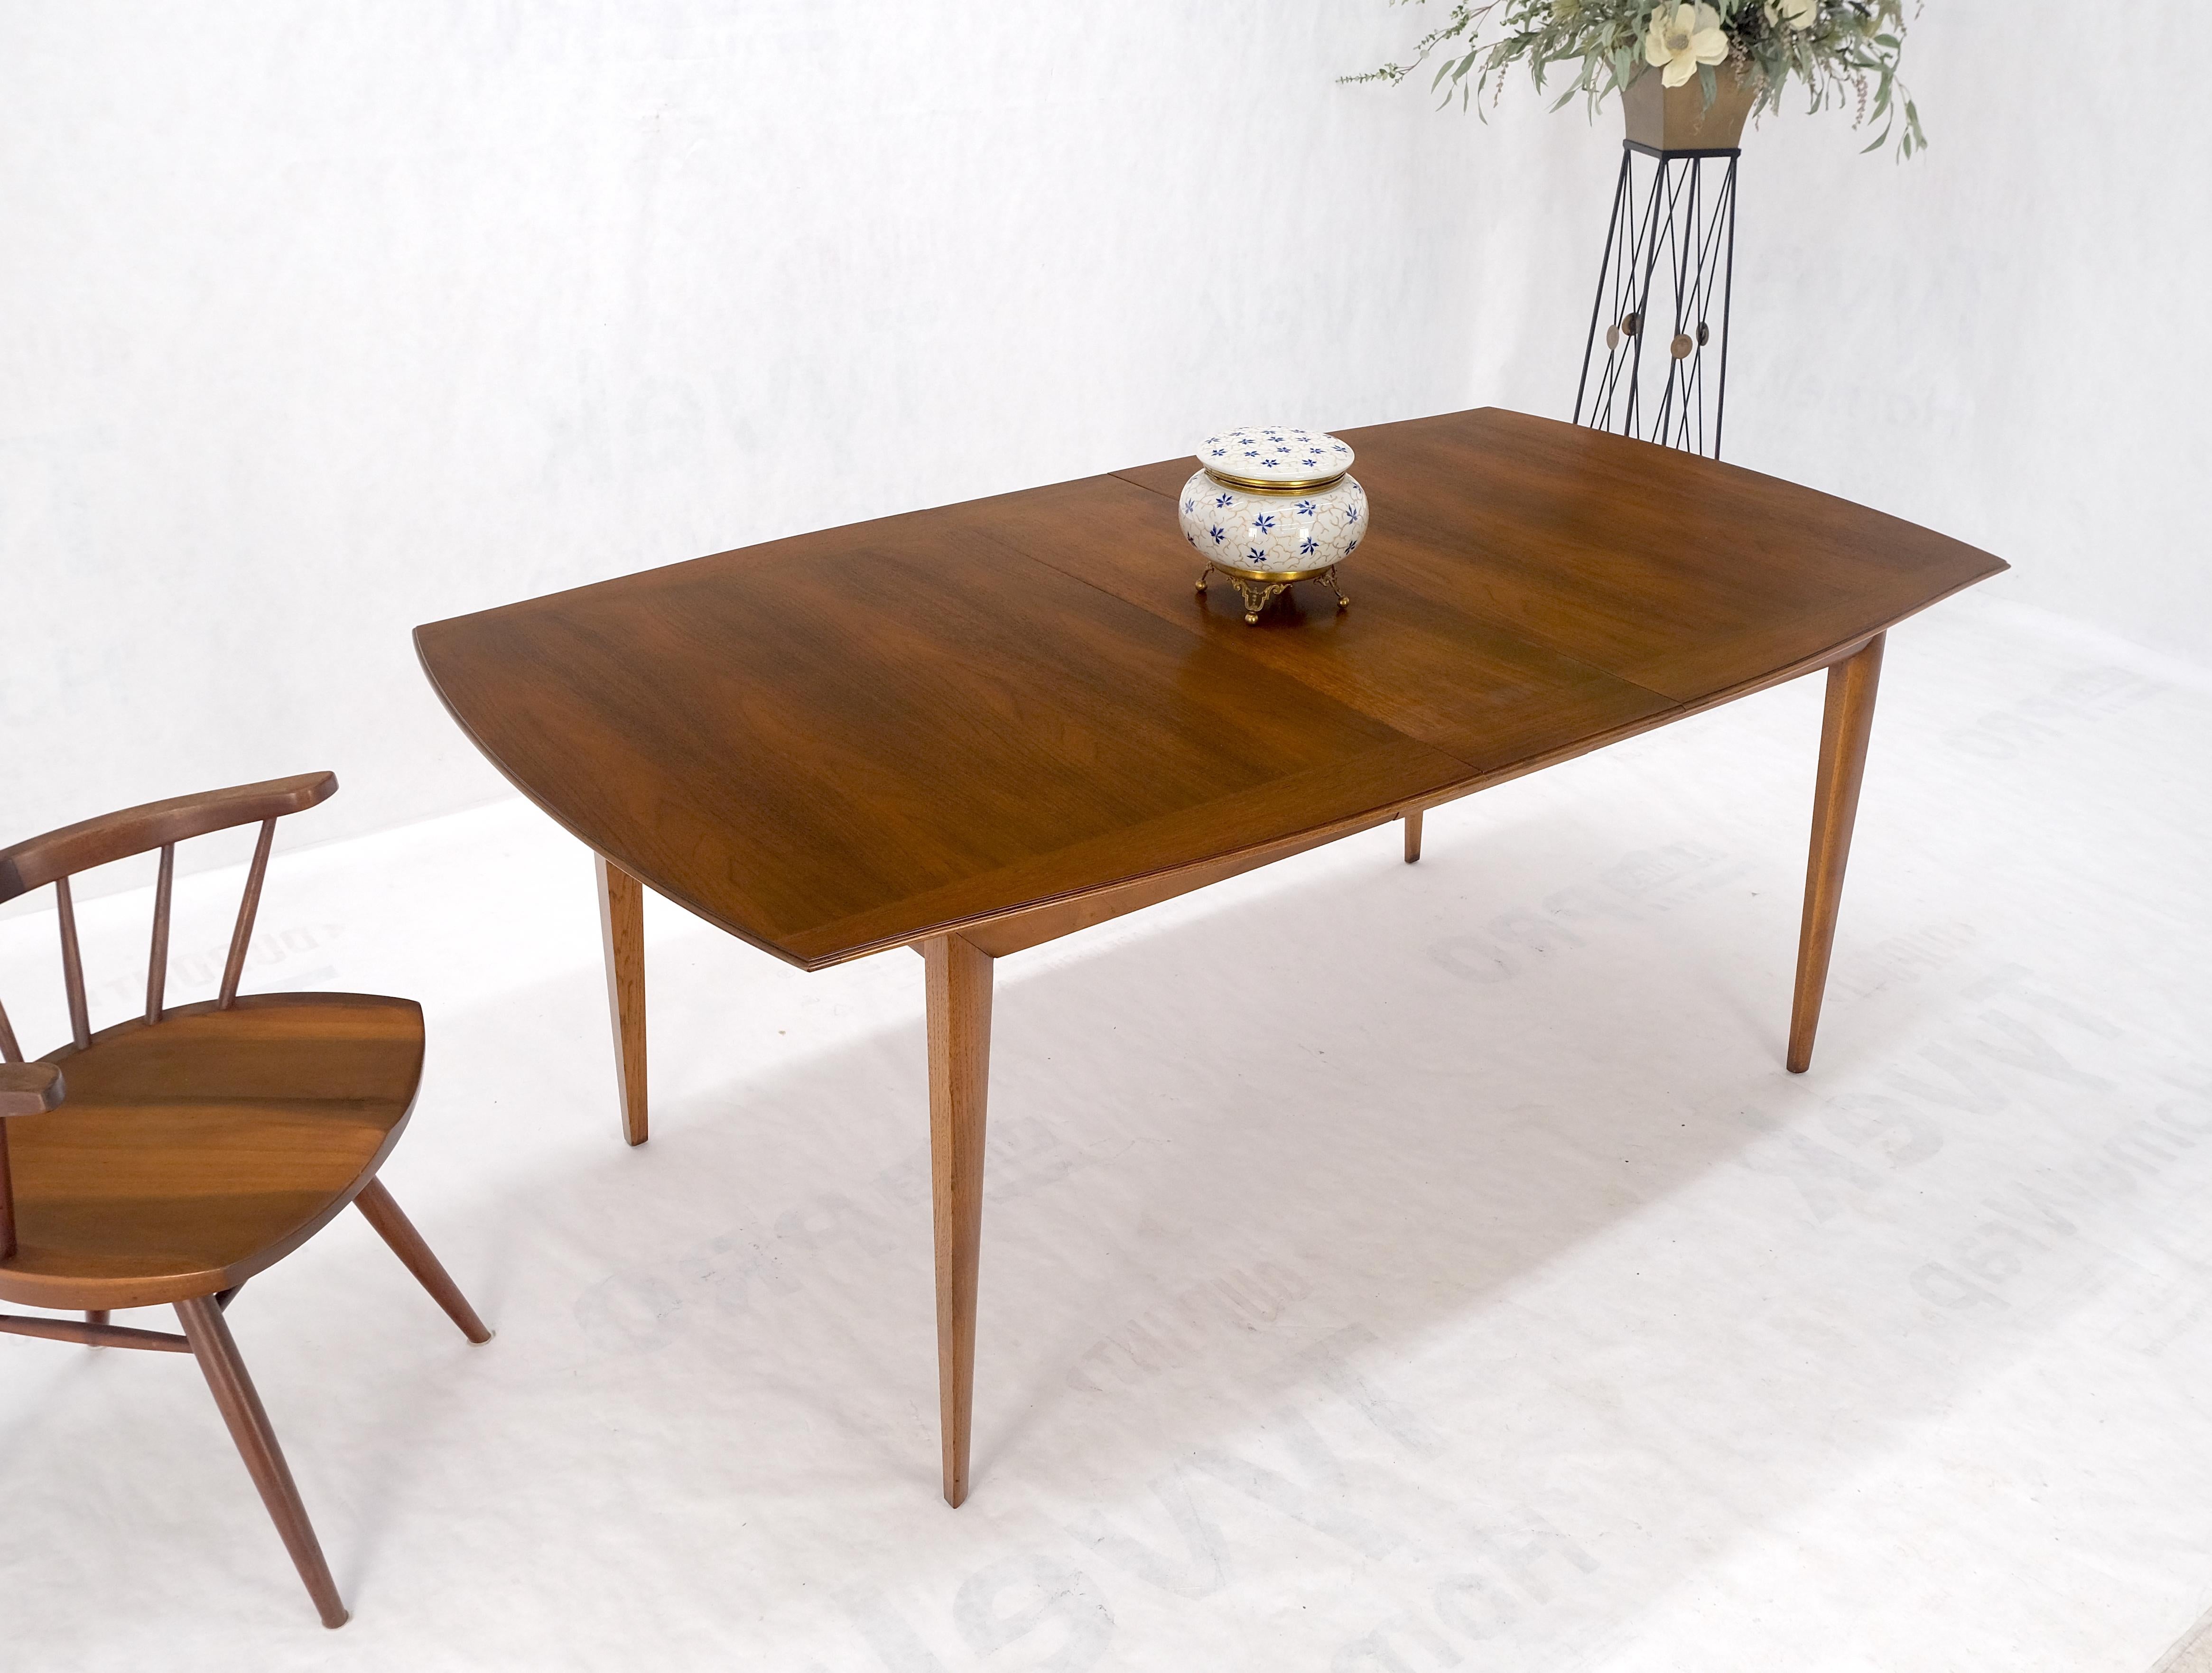 American Walnut Mid Century Modern Boat Shape Dining Table 1 Extension Leaf MINT For Sale 5